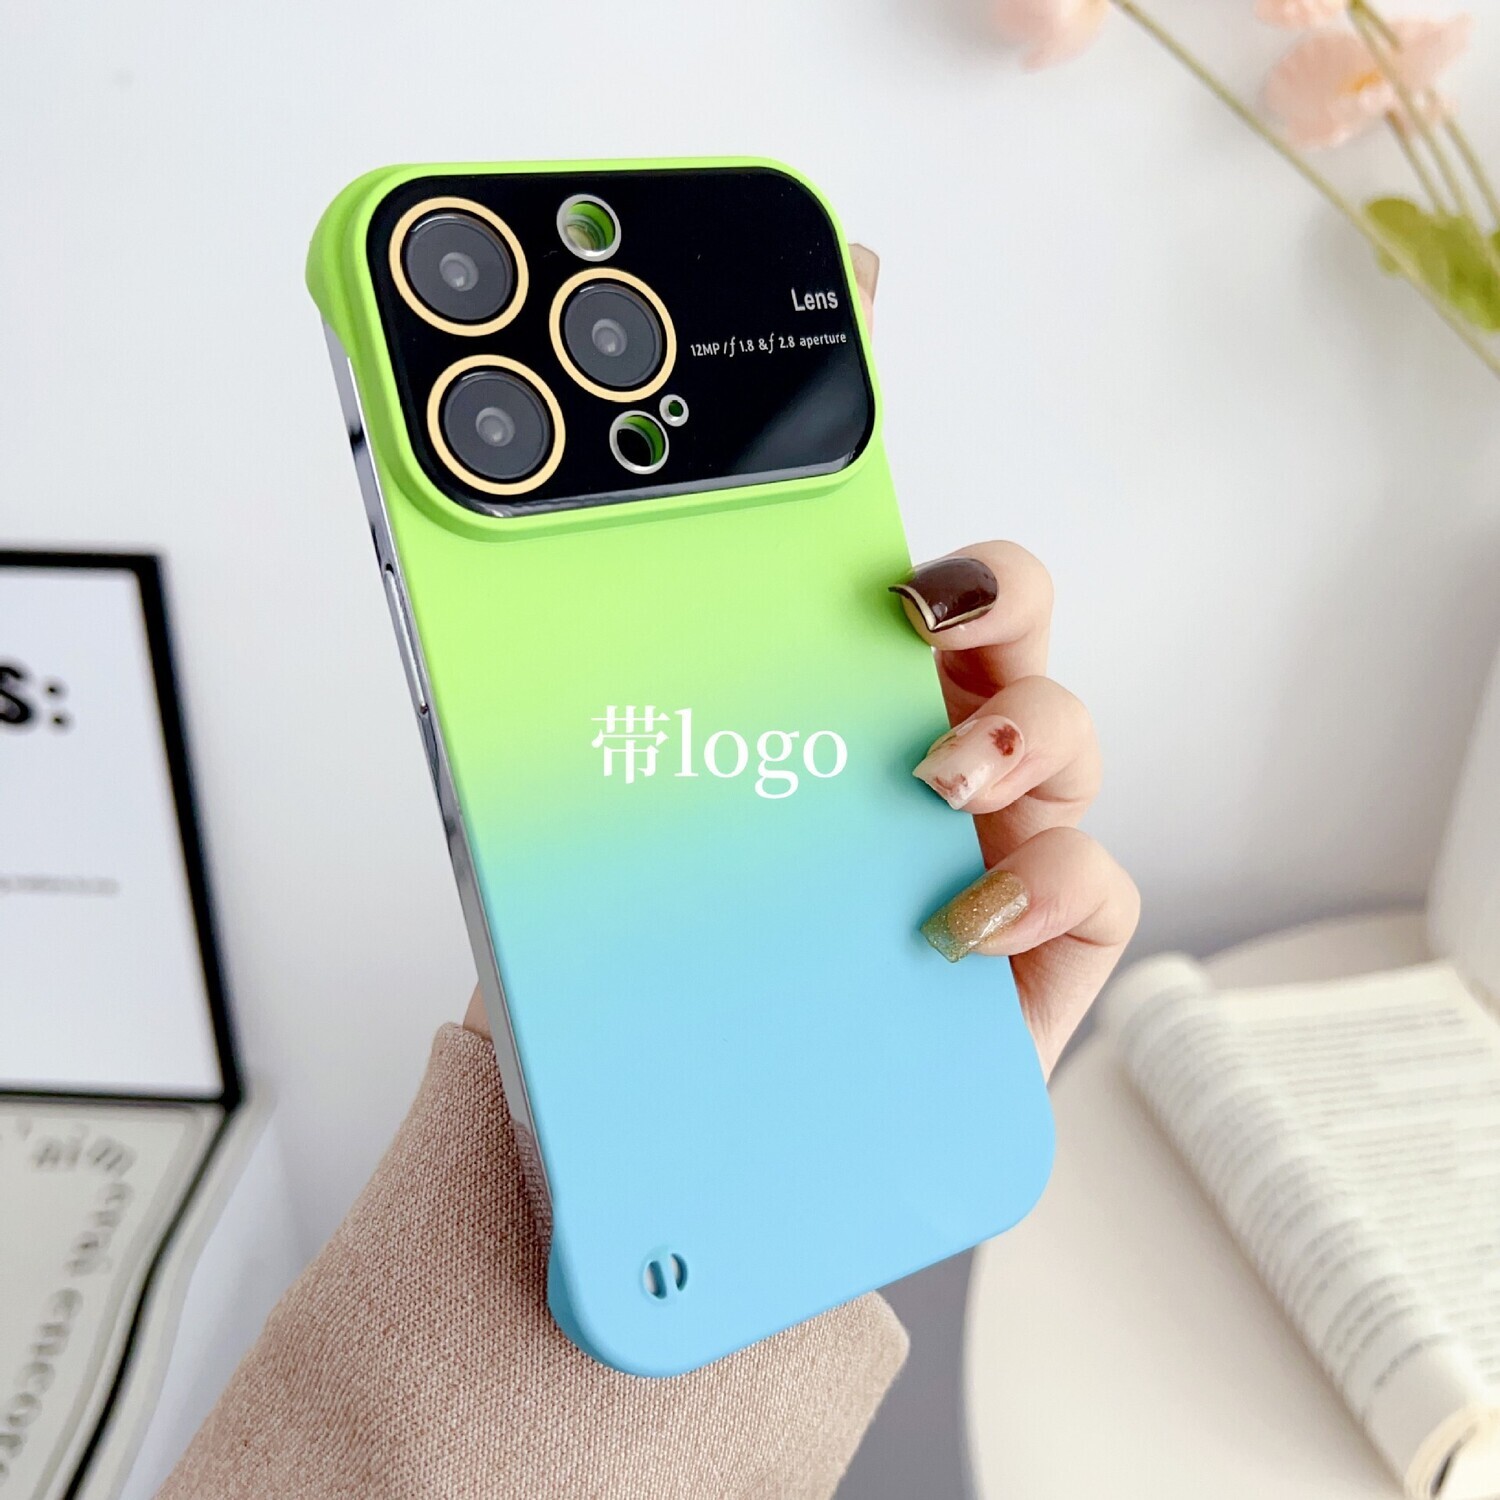 Frameless Large Window Goggle Gradient Skin Matte iPhone Case, Color: Blue+logo, Model: Iphone 14promax